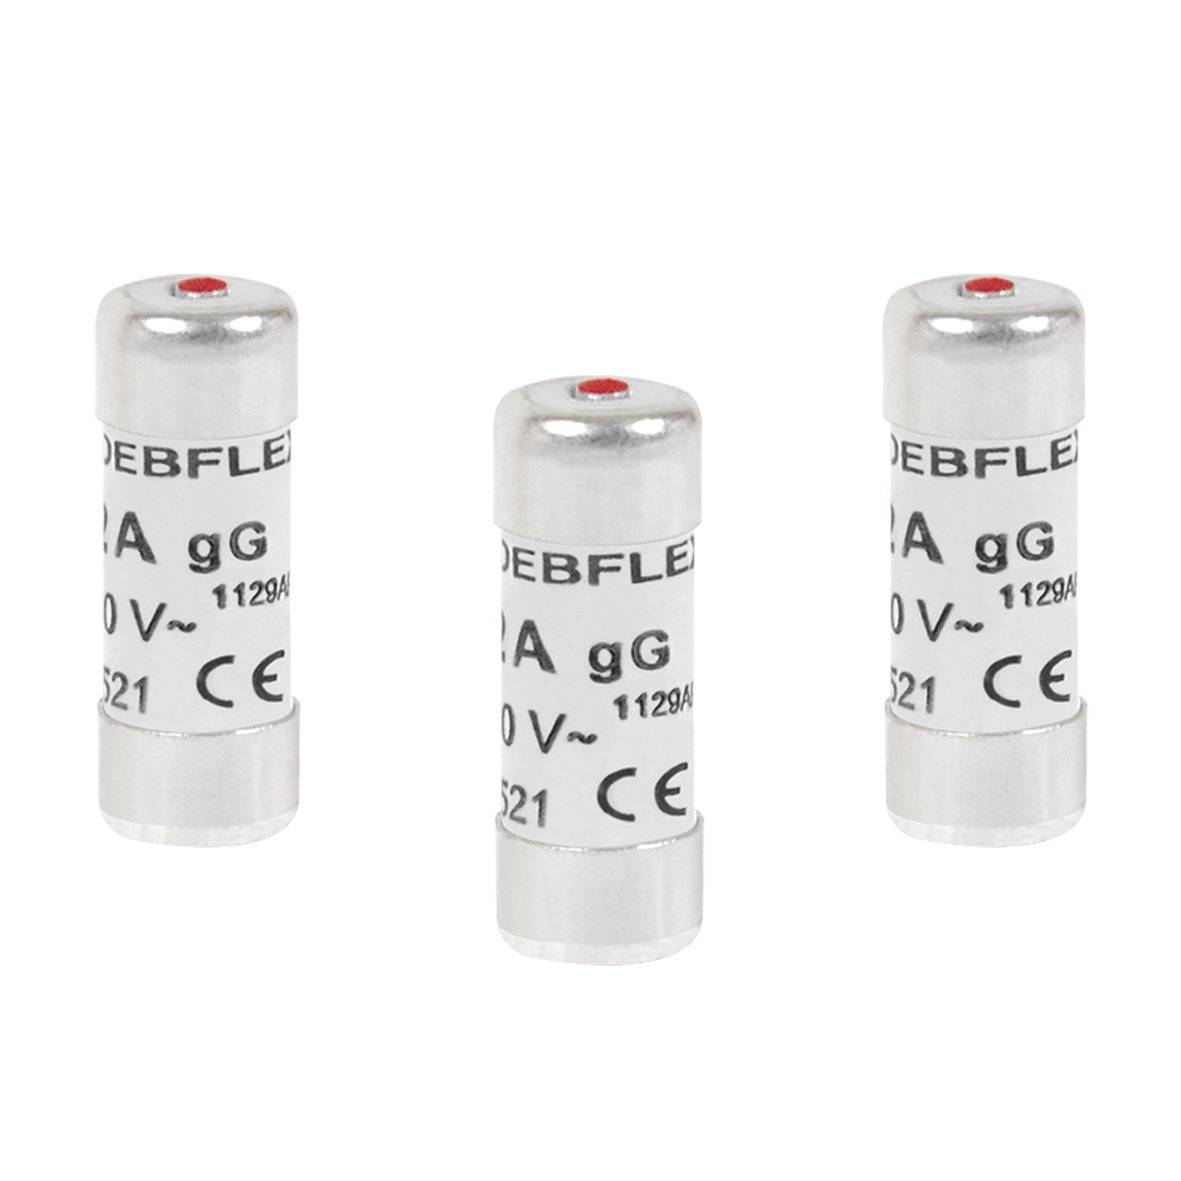 Fuses with indicator: 6 amps (3 pieces)